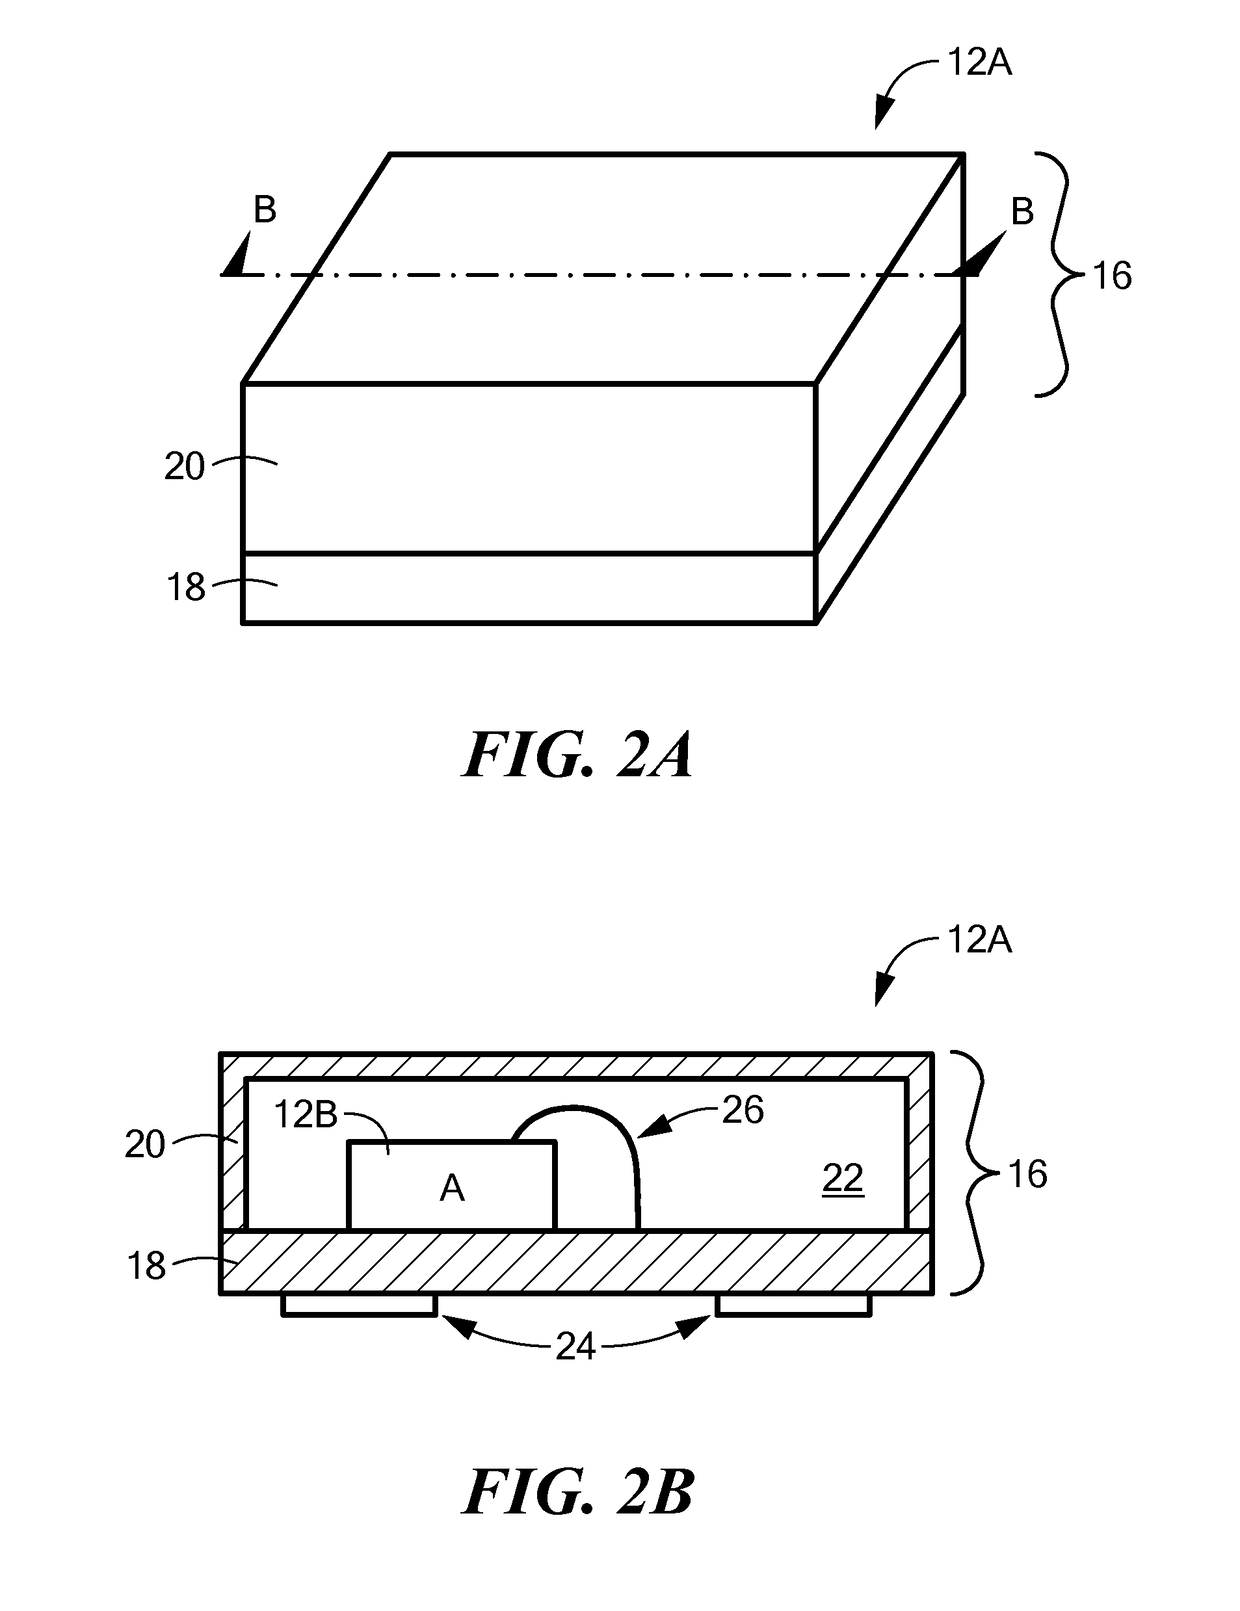 Accelerometer with offset compensation